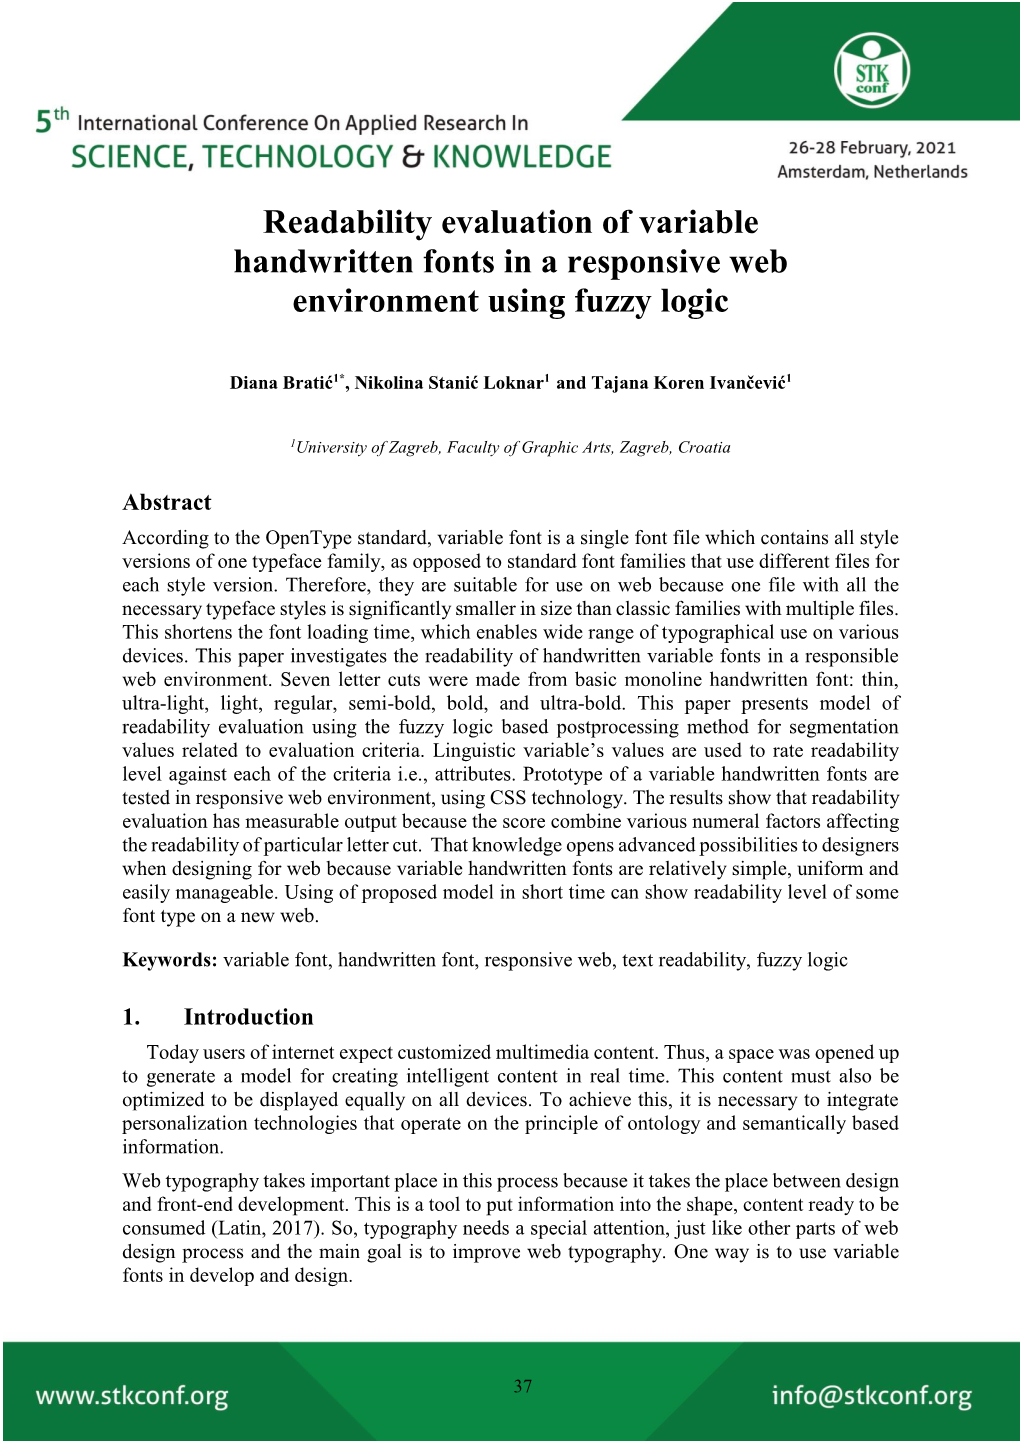 Readability Evaluation of Variable Handwritten Fonts in a Responsive Web Environment Using Fuzzy Logic